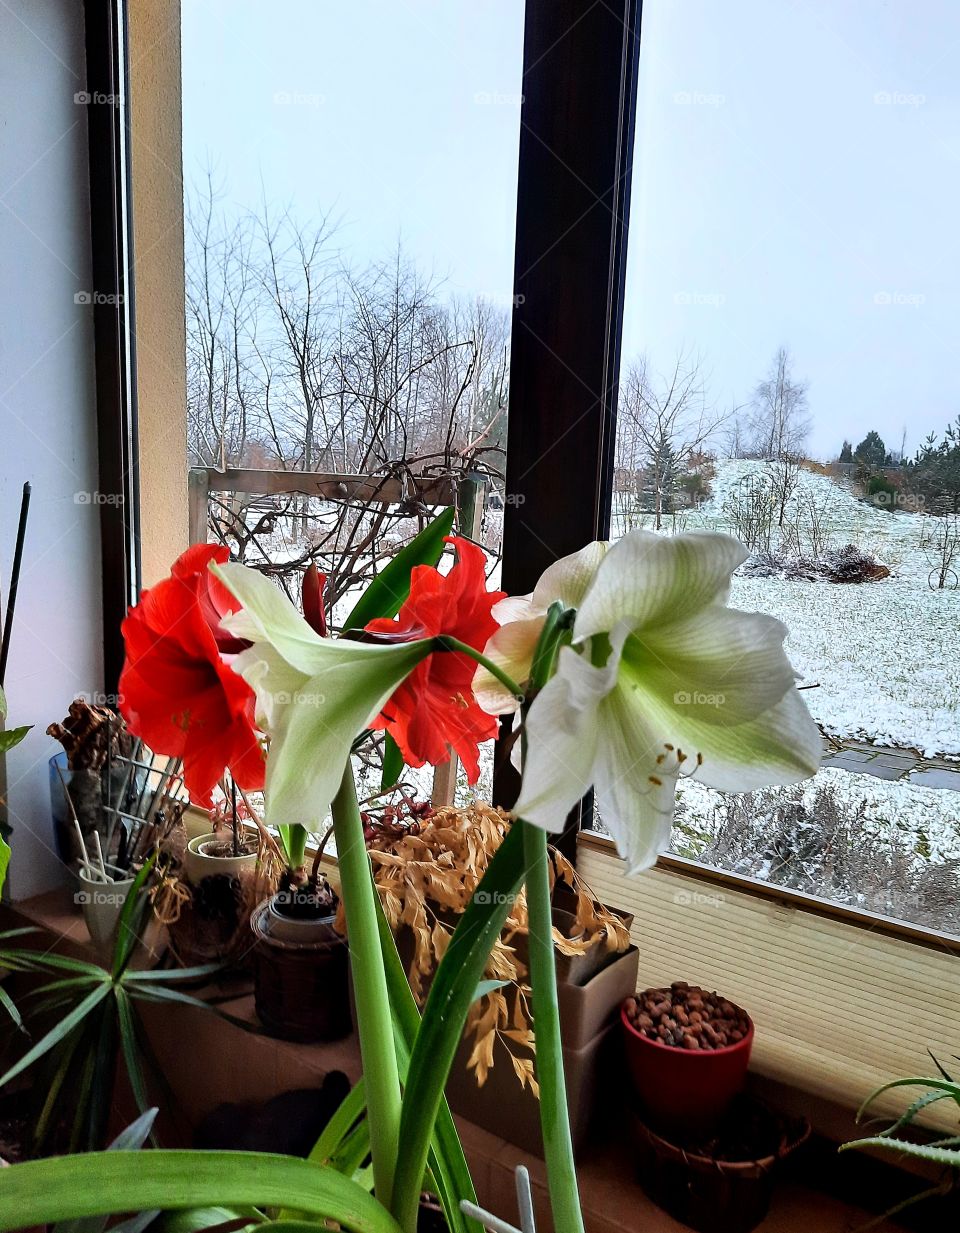 winter nature  - red and white blooming amaryllis flowers at the winow with winter scenery outside